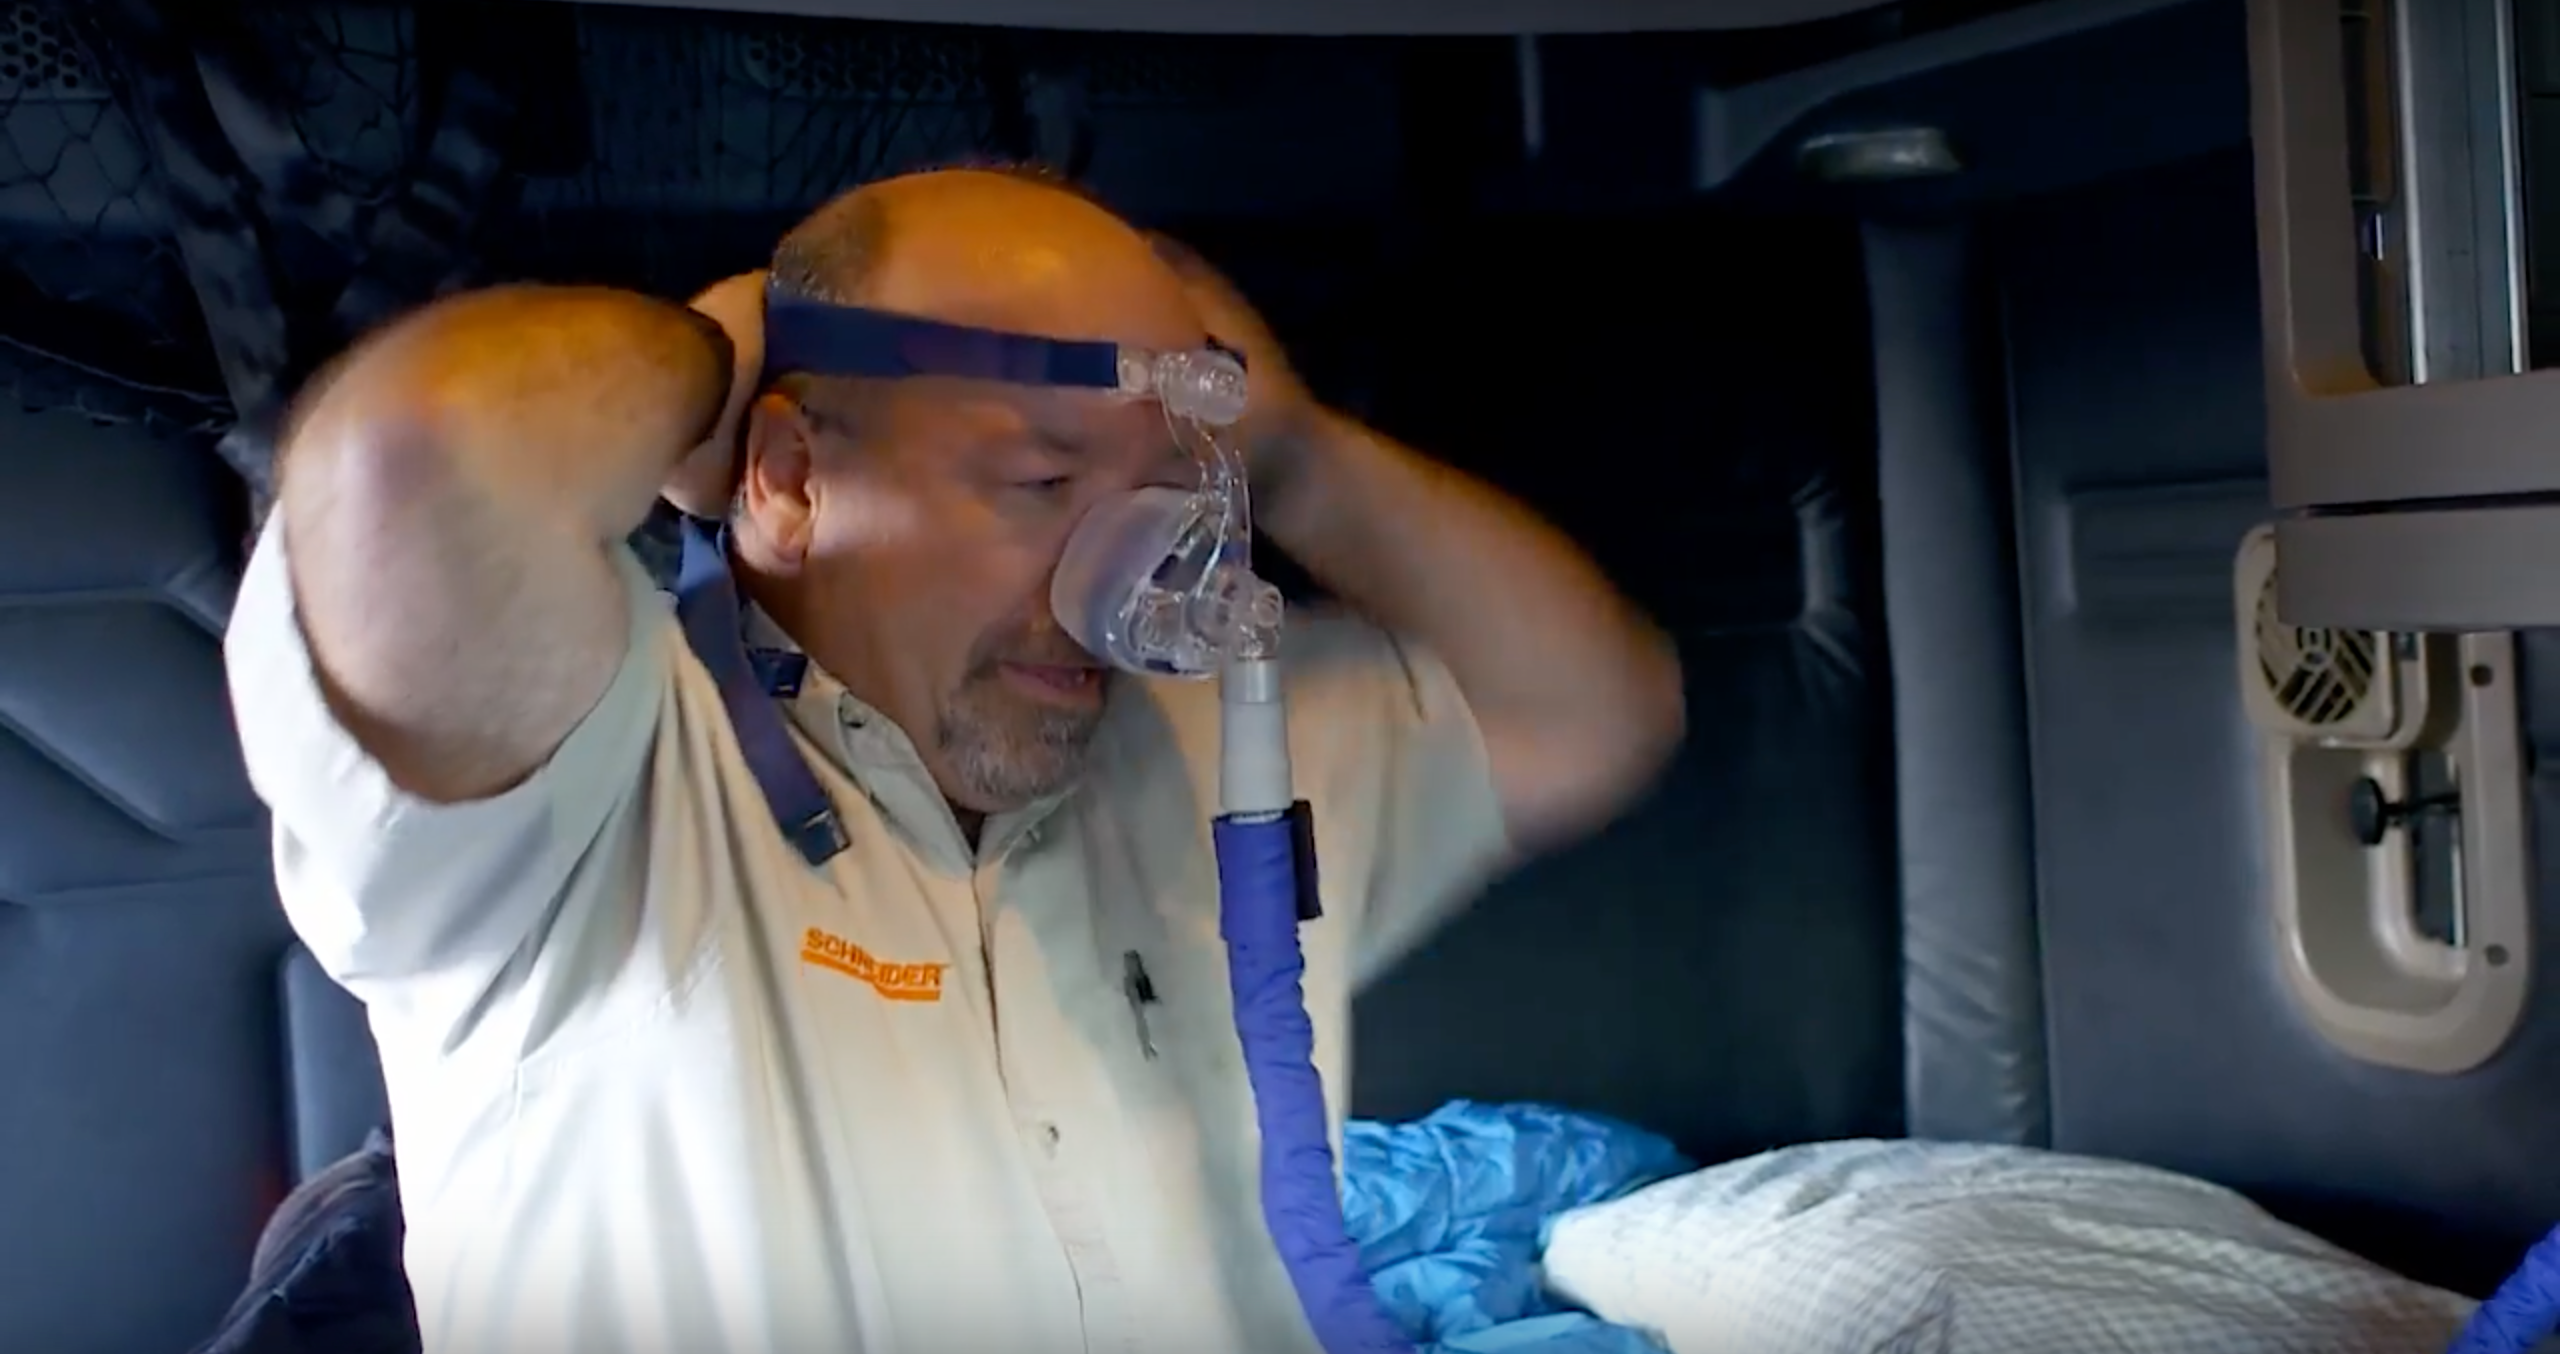 A Schneider driver shows how to put on a CPAP mask by putting the mask over his nose and securing the straps along the back of his head.